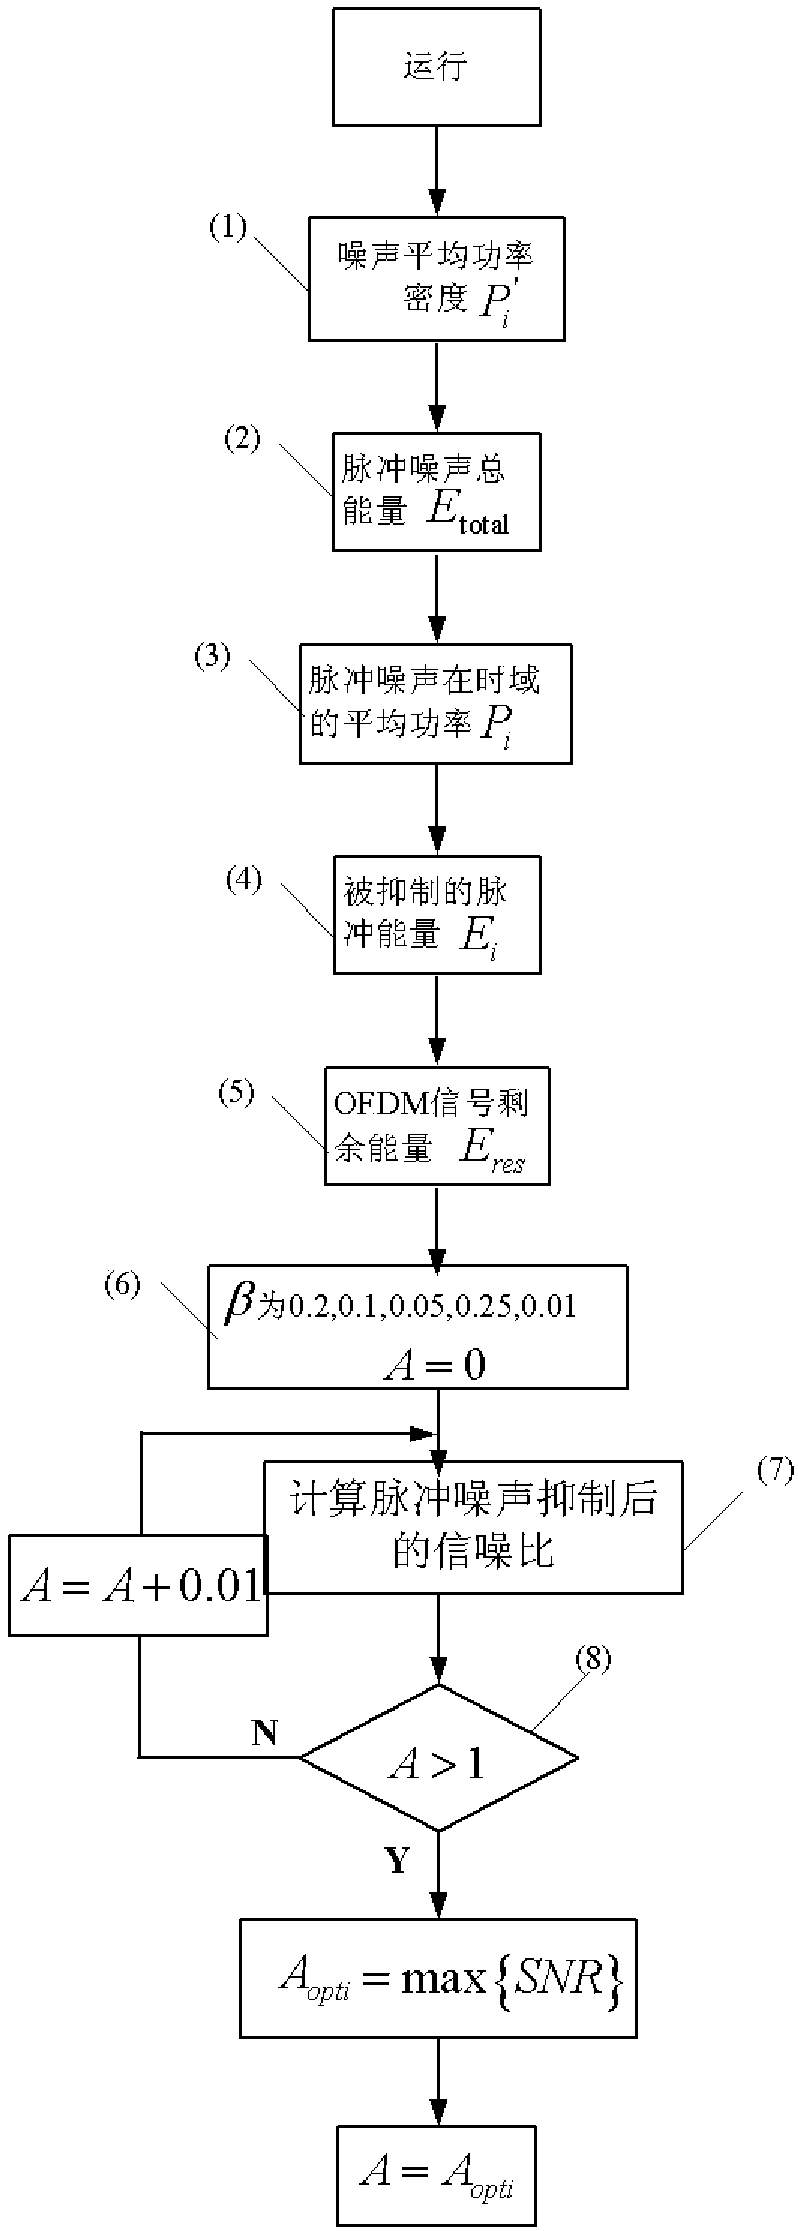 Noise Suppression Method Applied to Broadband OFDM Power Line Communication System